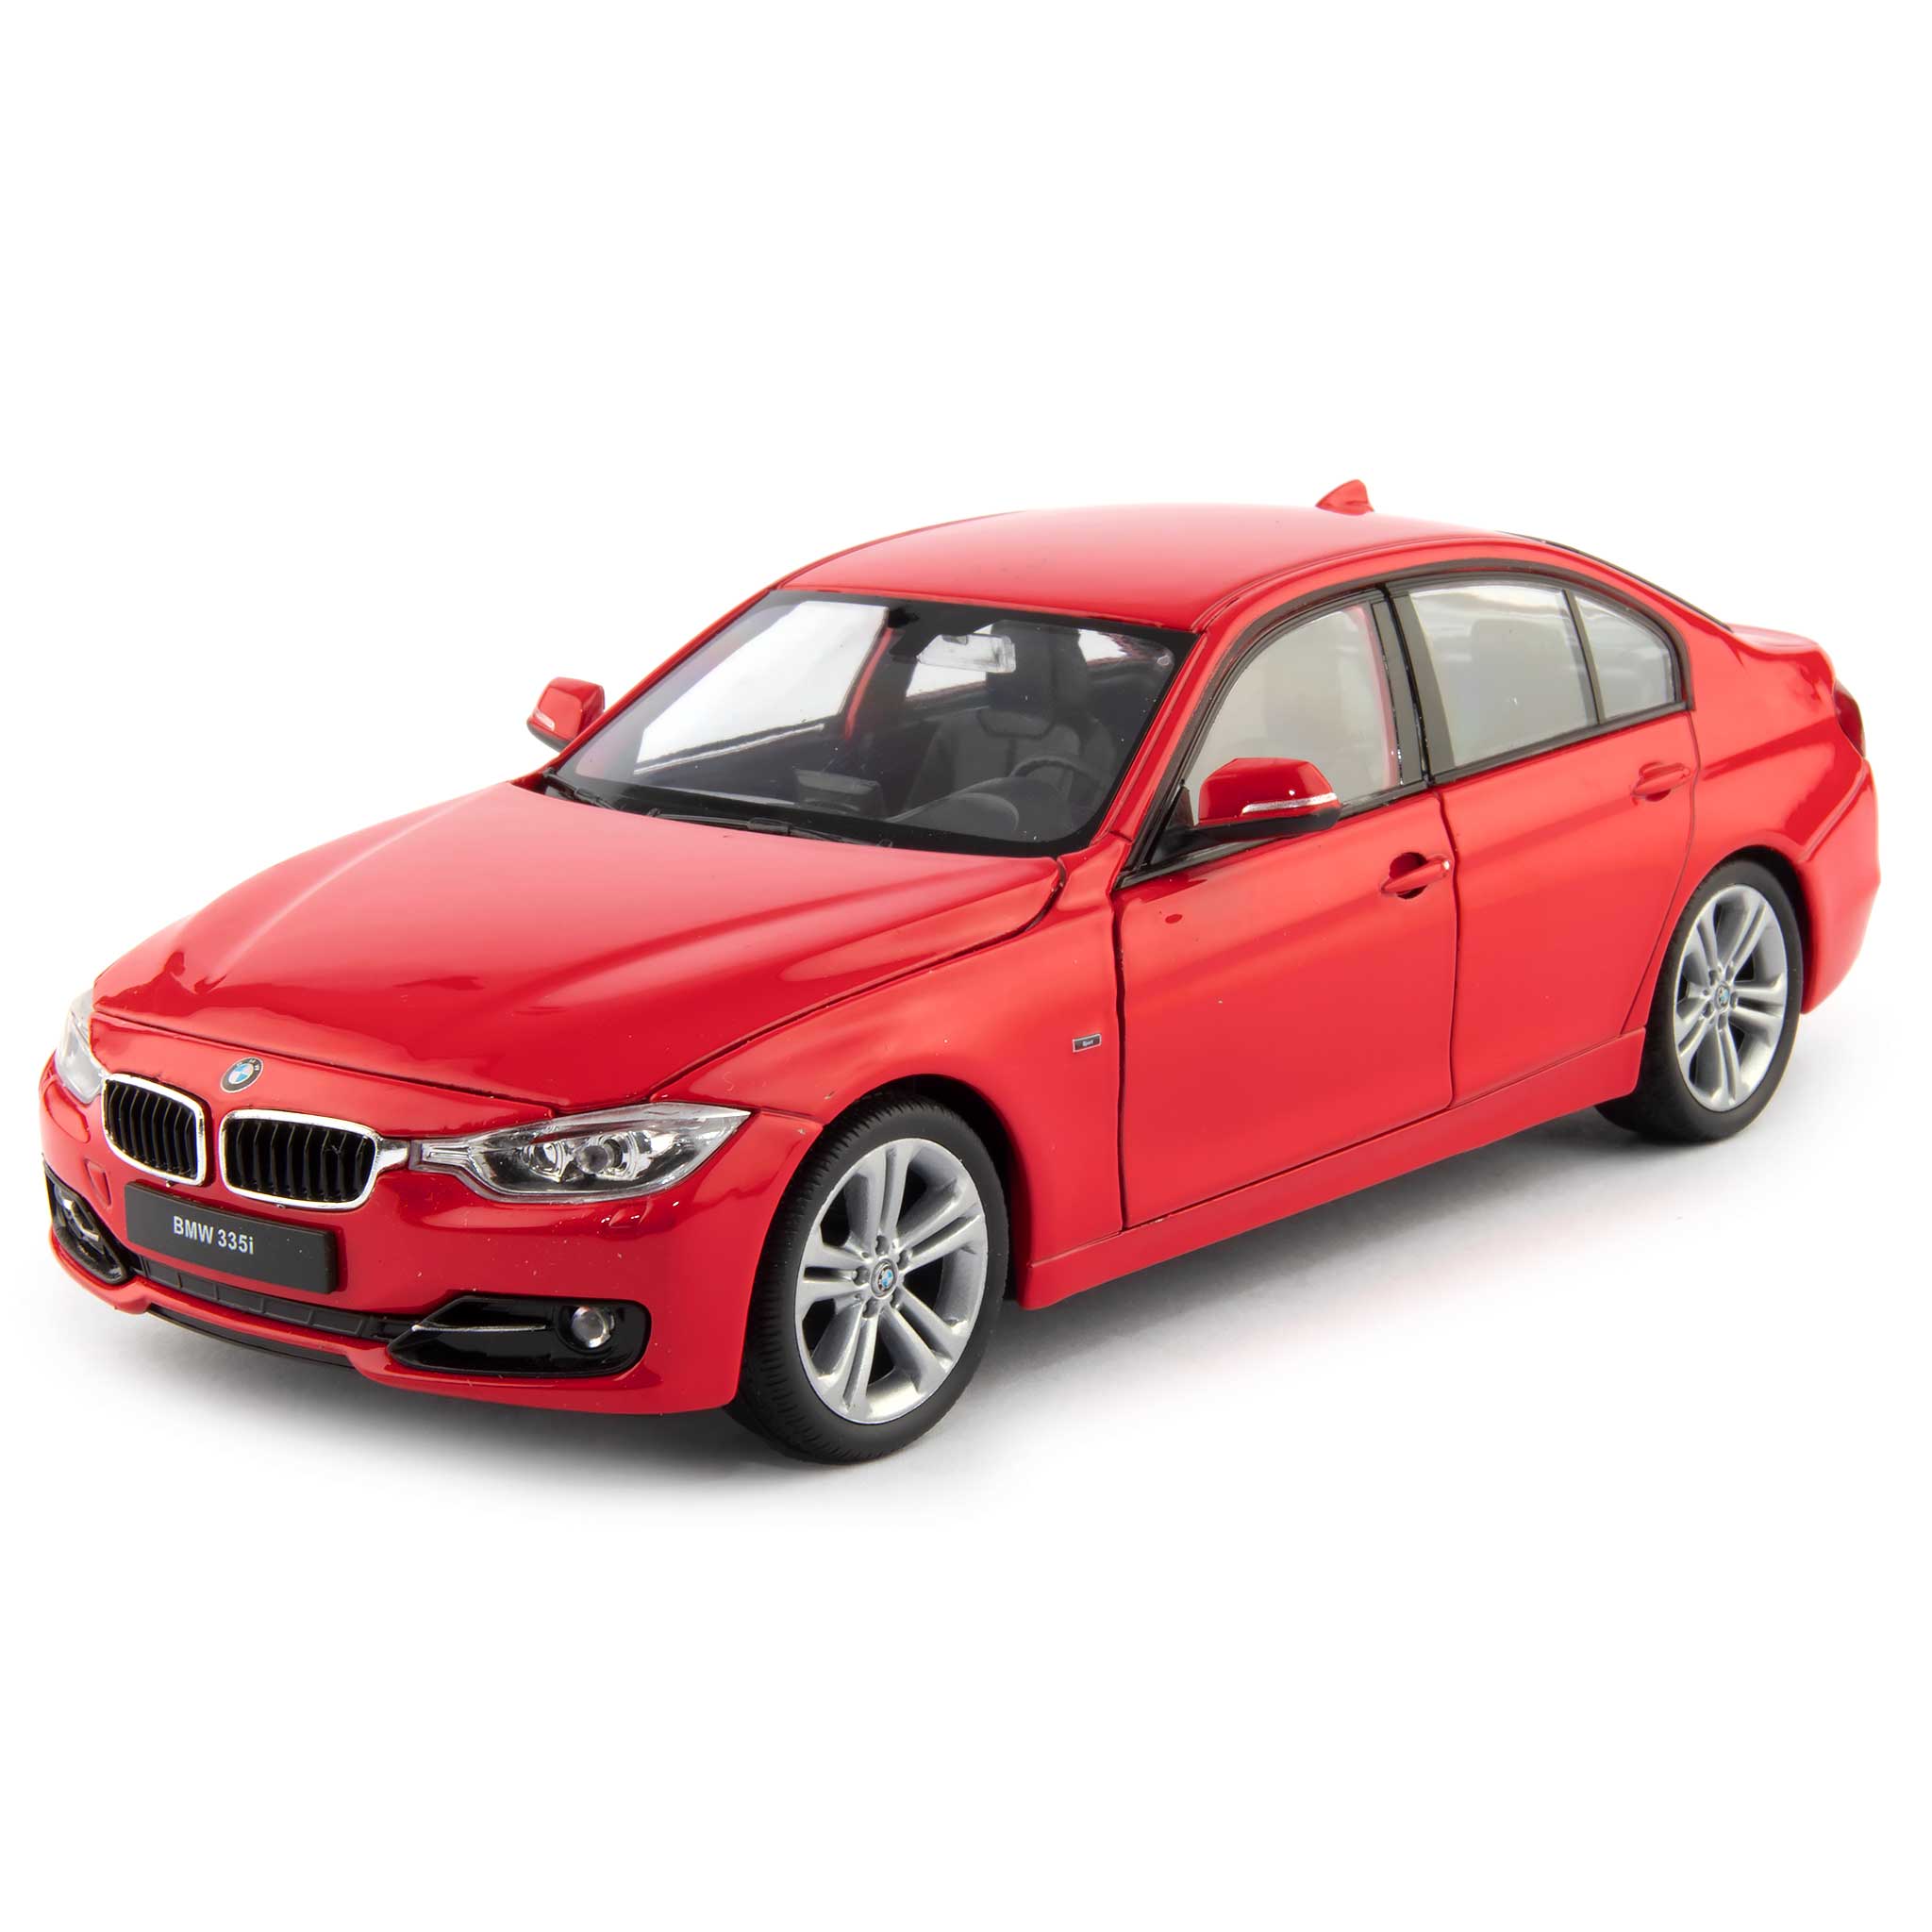 Top Android Multimedia Navigation Devices: Latest Car DVD Navigation with Android 8.0 for BMW 3 Series F30 Available Now!